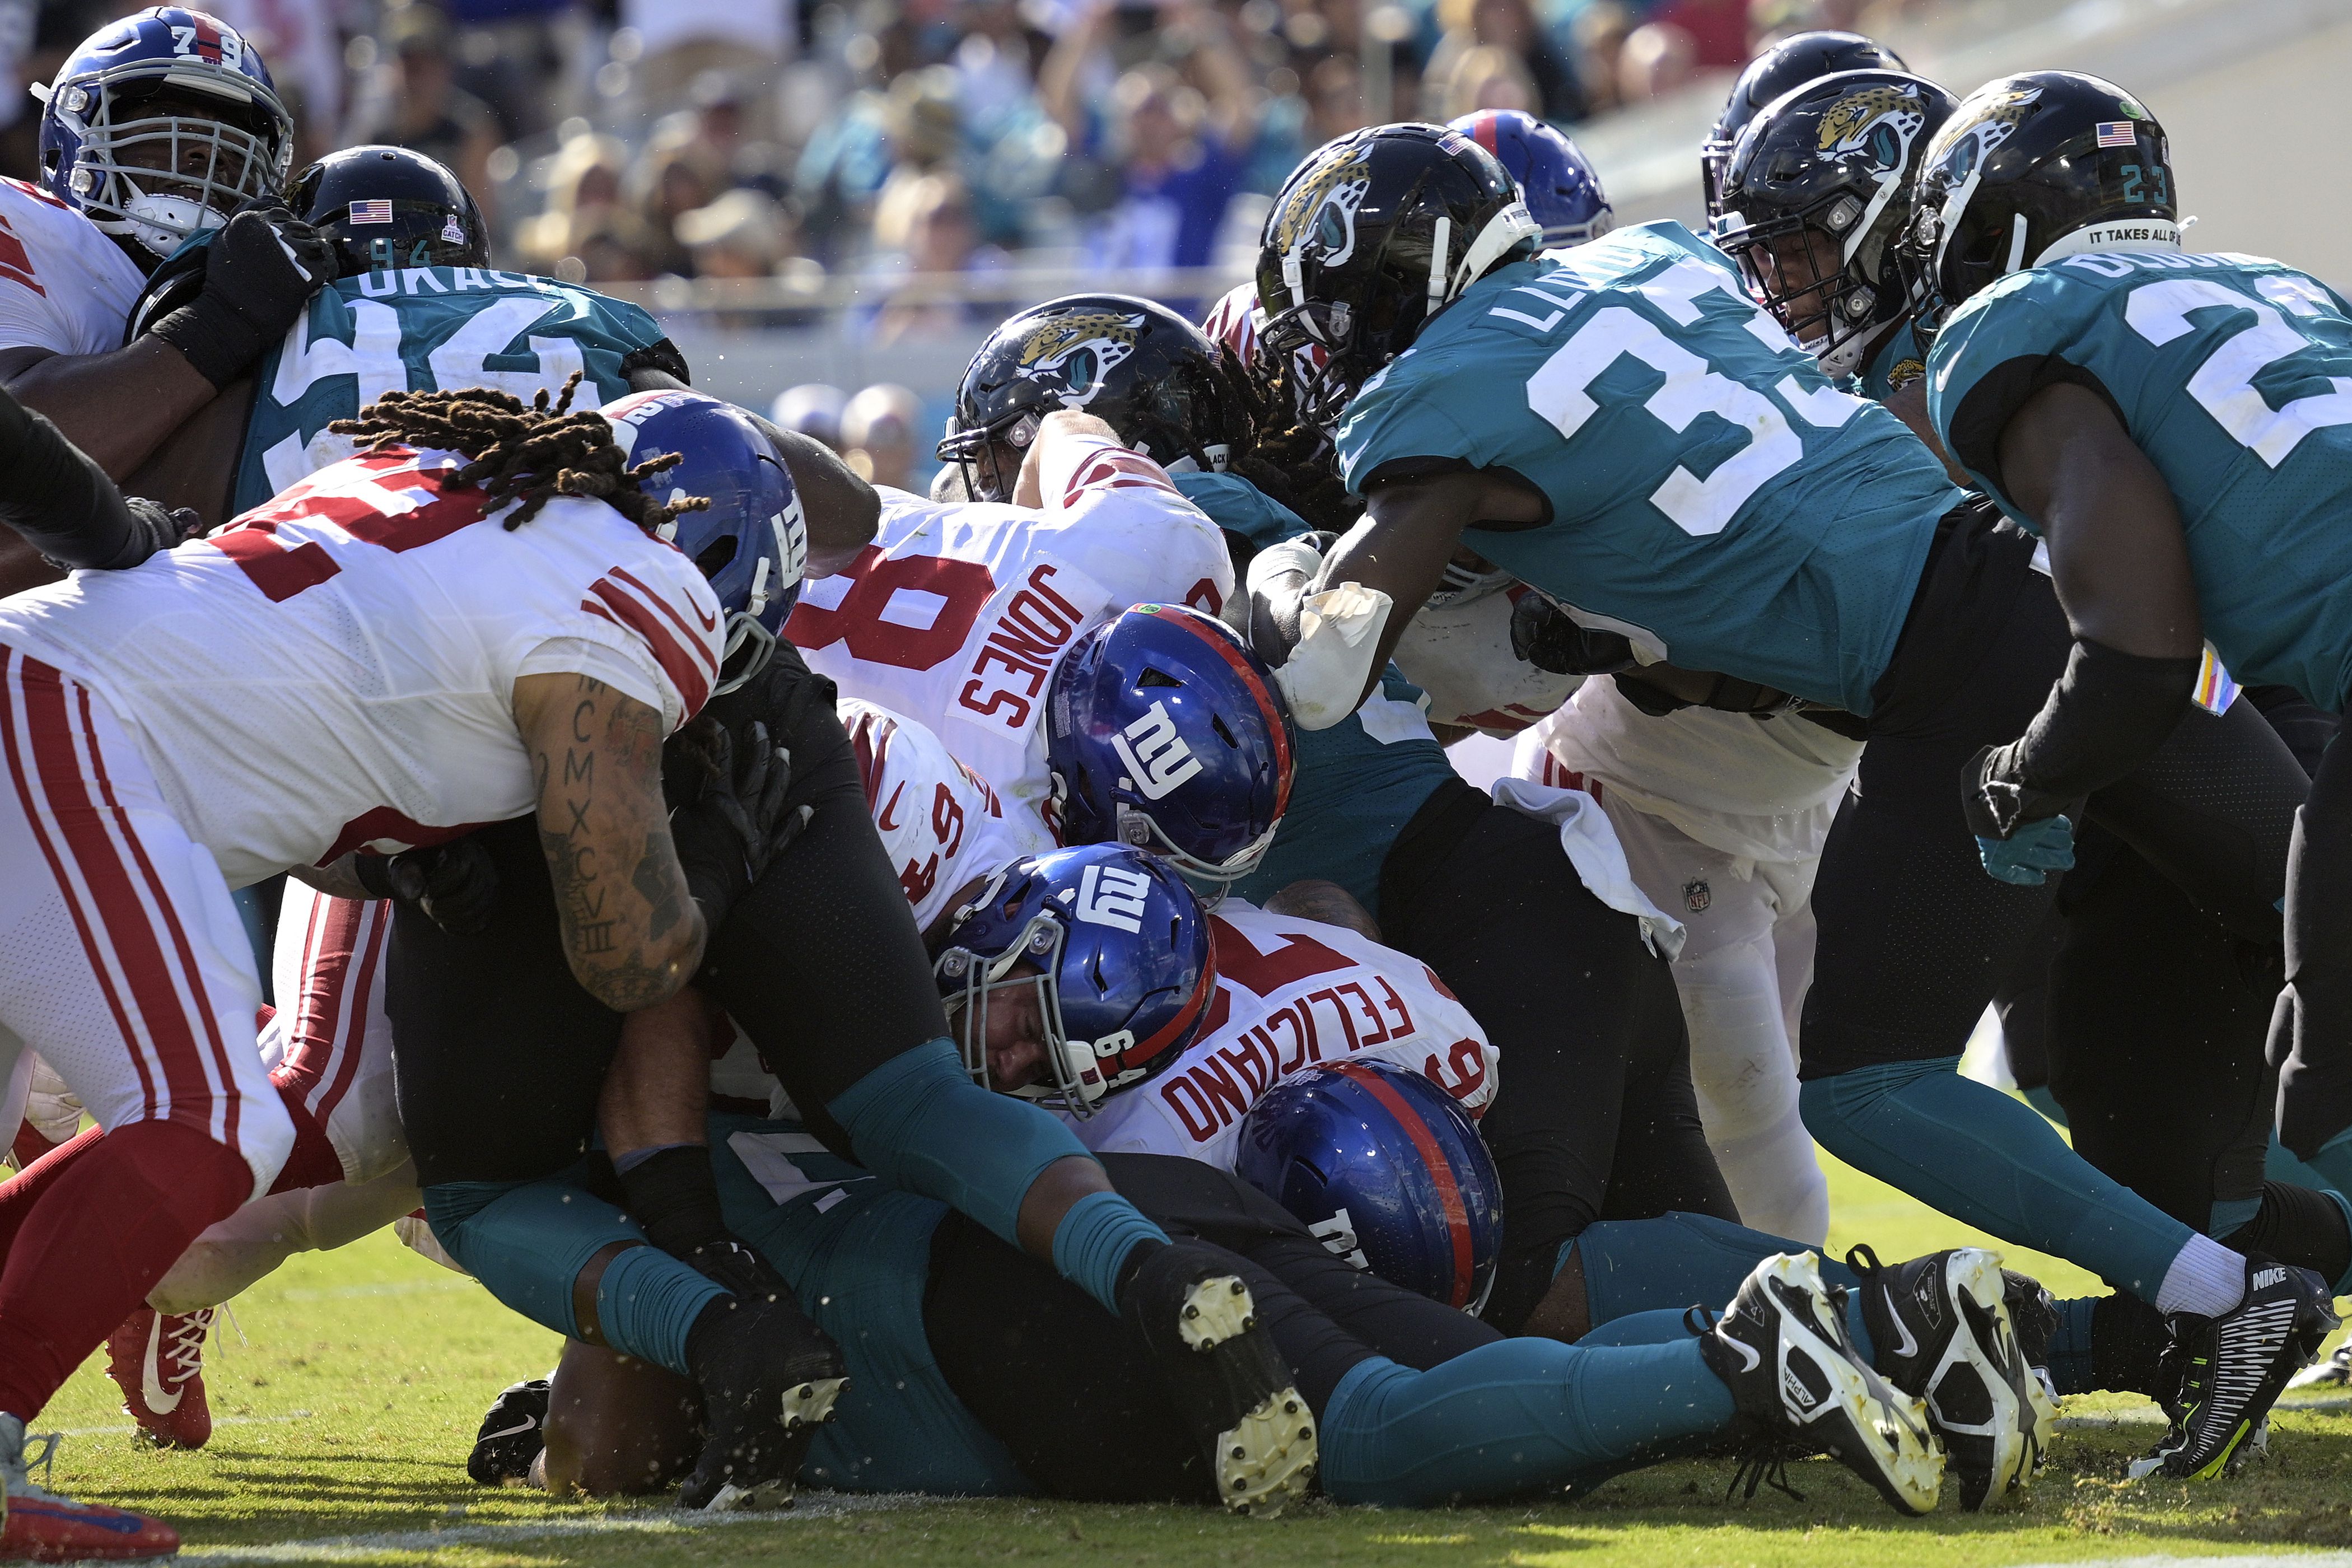 4 downs: Takeaways from the Giants' 23-17 win over the Jaguars